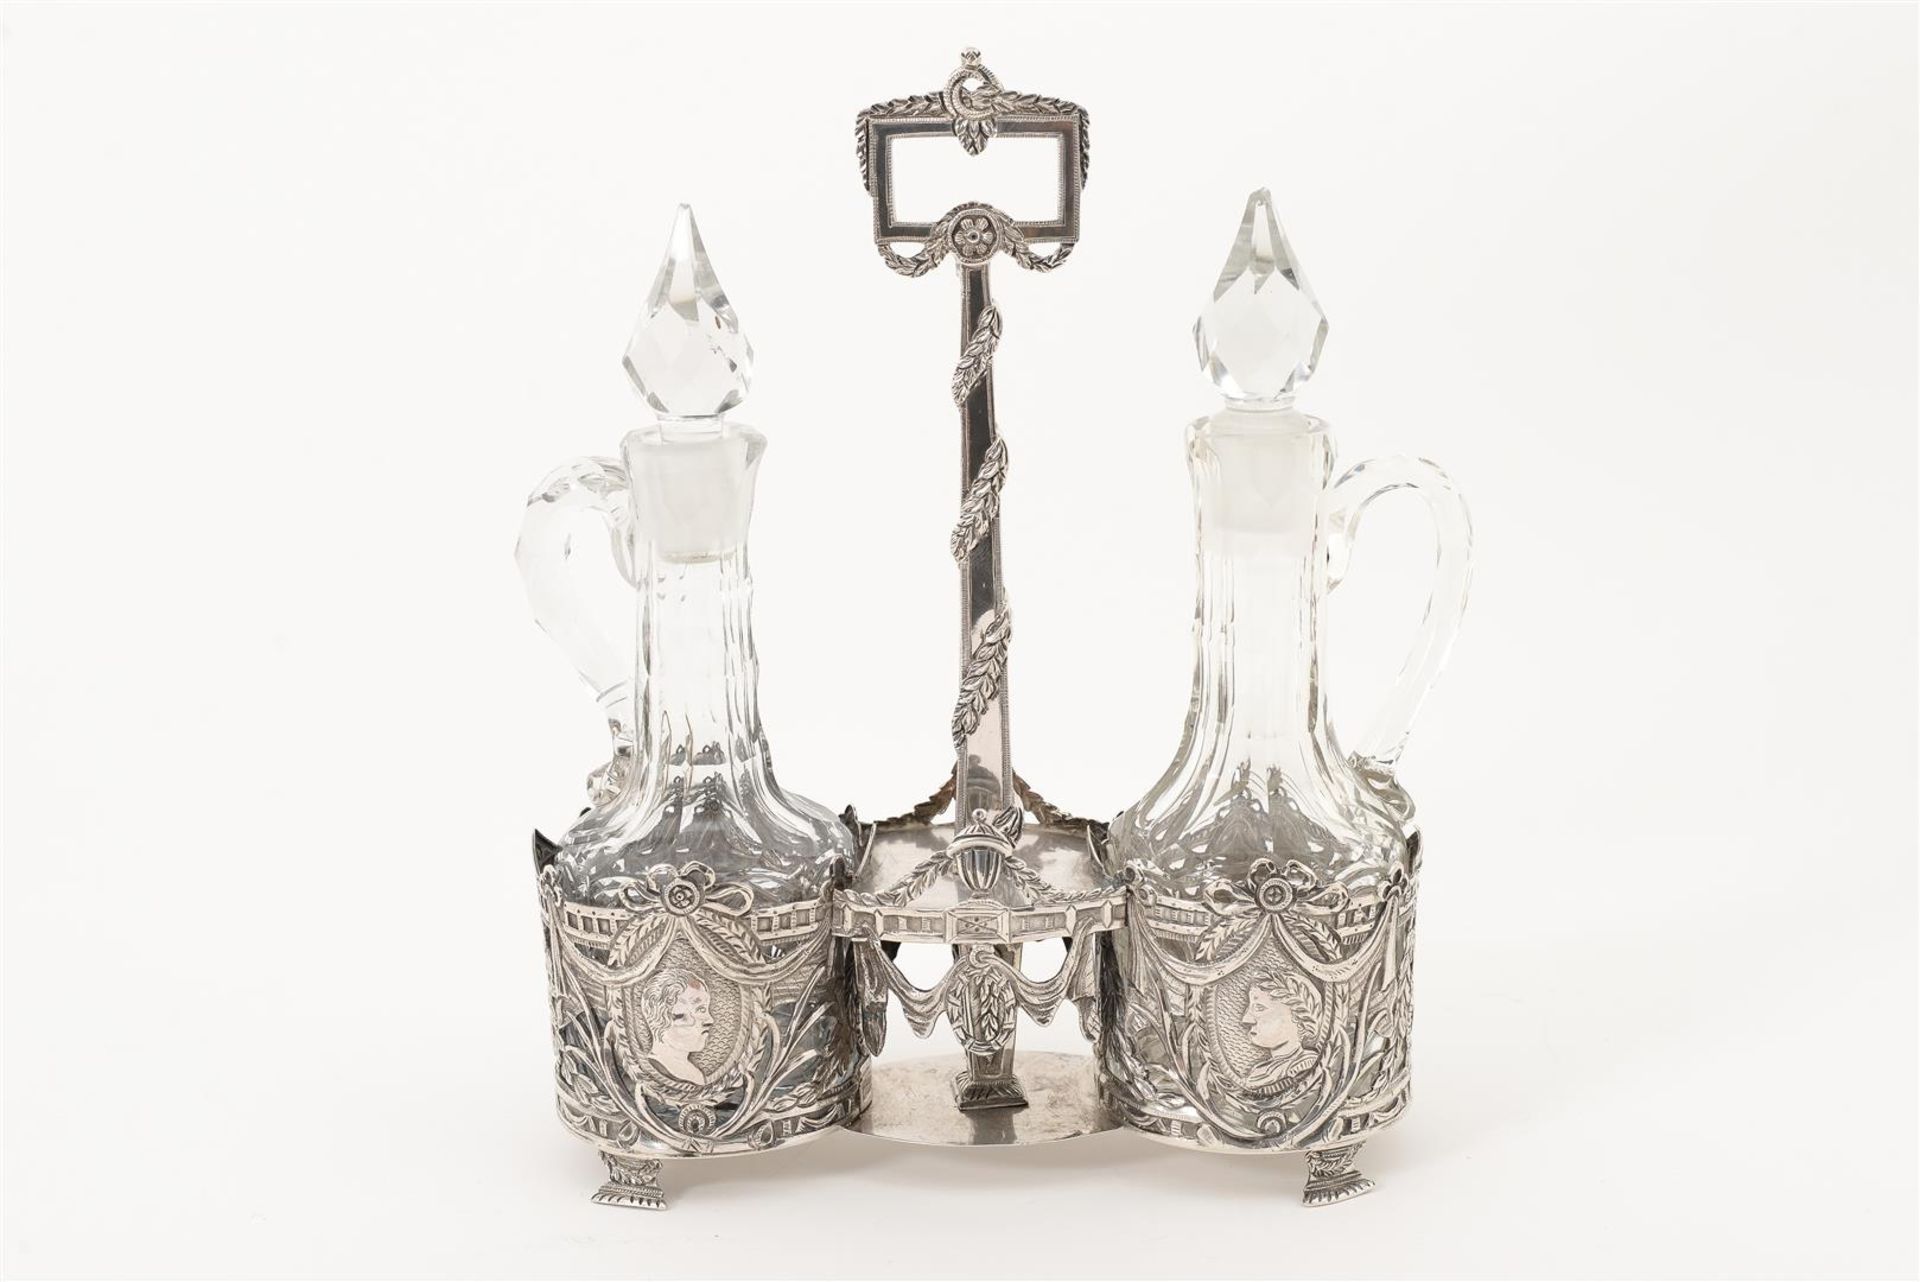 A silver oil and vinegar set with original crystal carafes. Marked with maker's mark, Lucas Oling, - Image 4 of 8